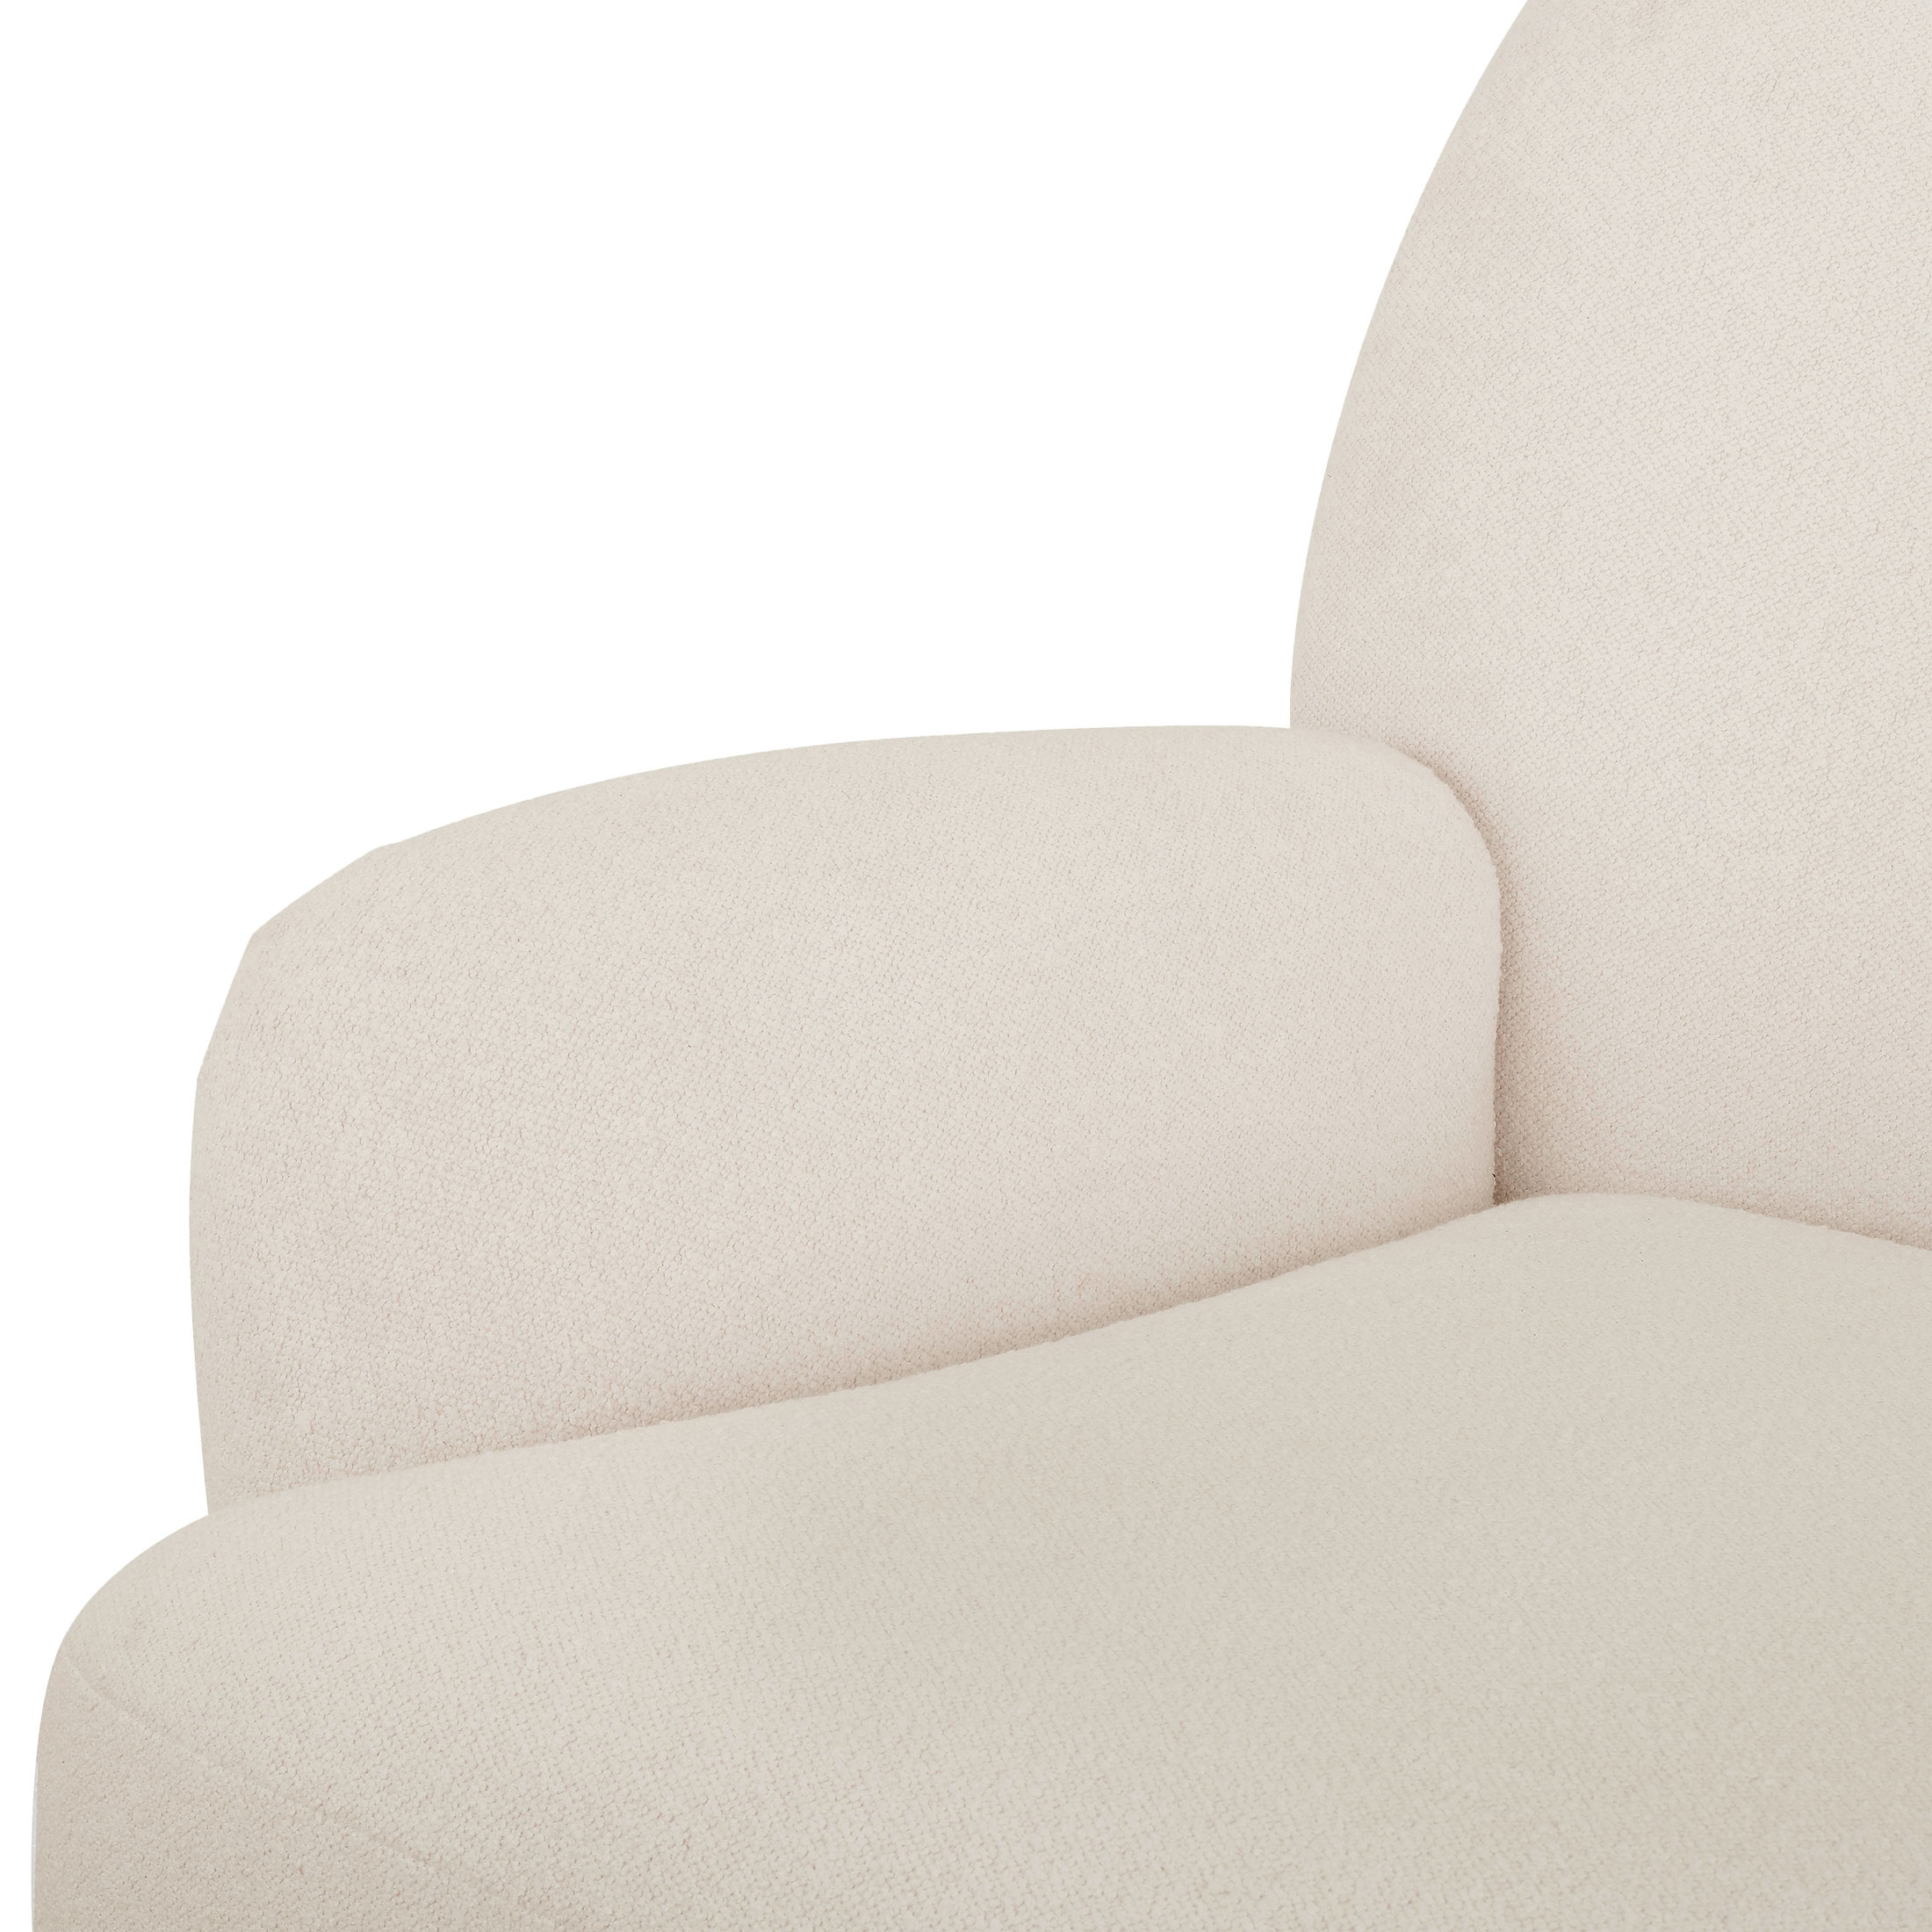 Better Homes & Gardens Waylen Accent Chair, by Dave & Jenny Marrs - image 5 of 8